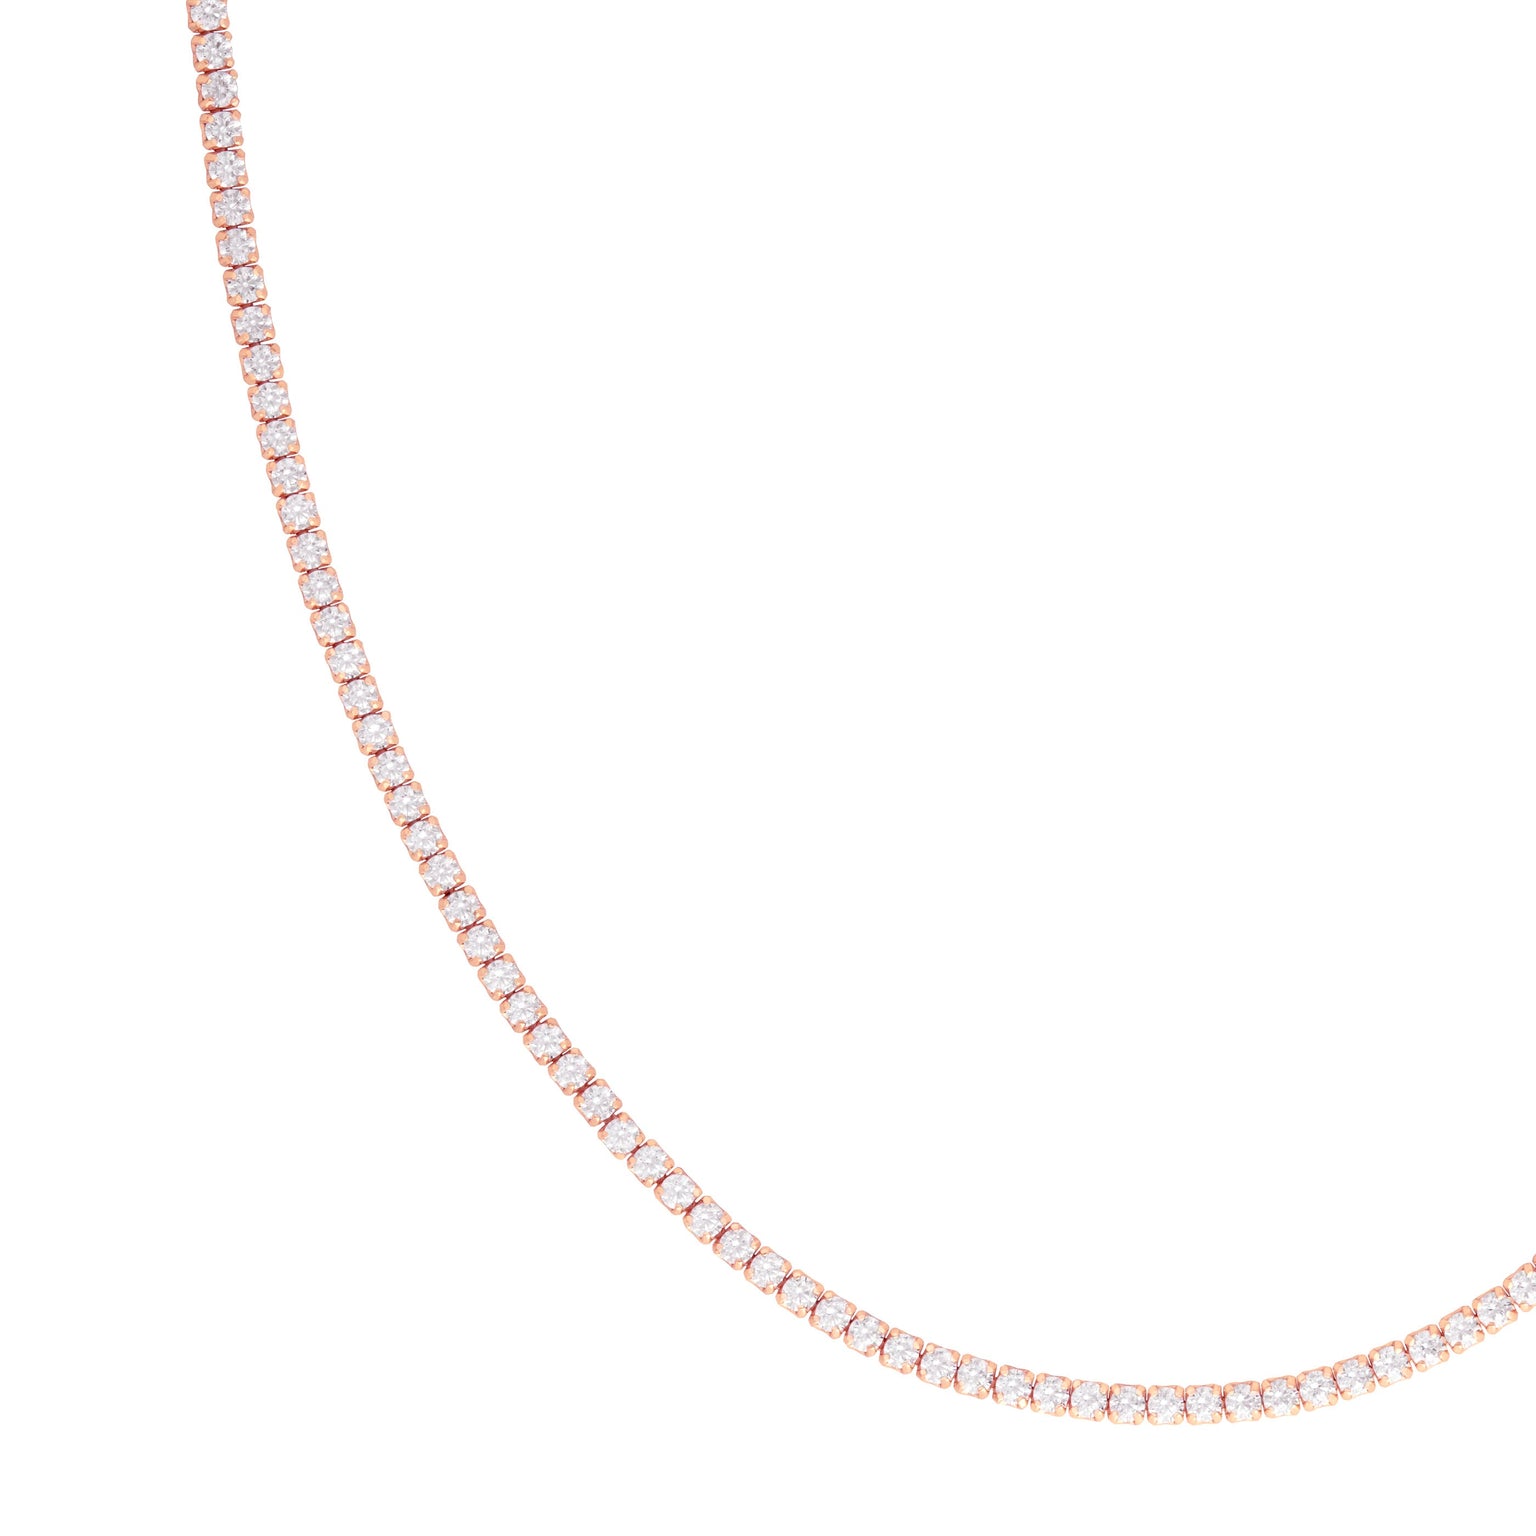 Tennis Chain Necklace in Rose Gold close up shot